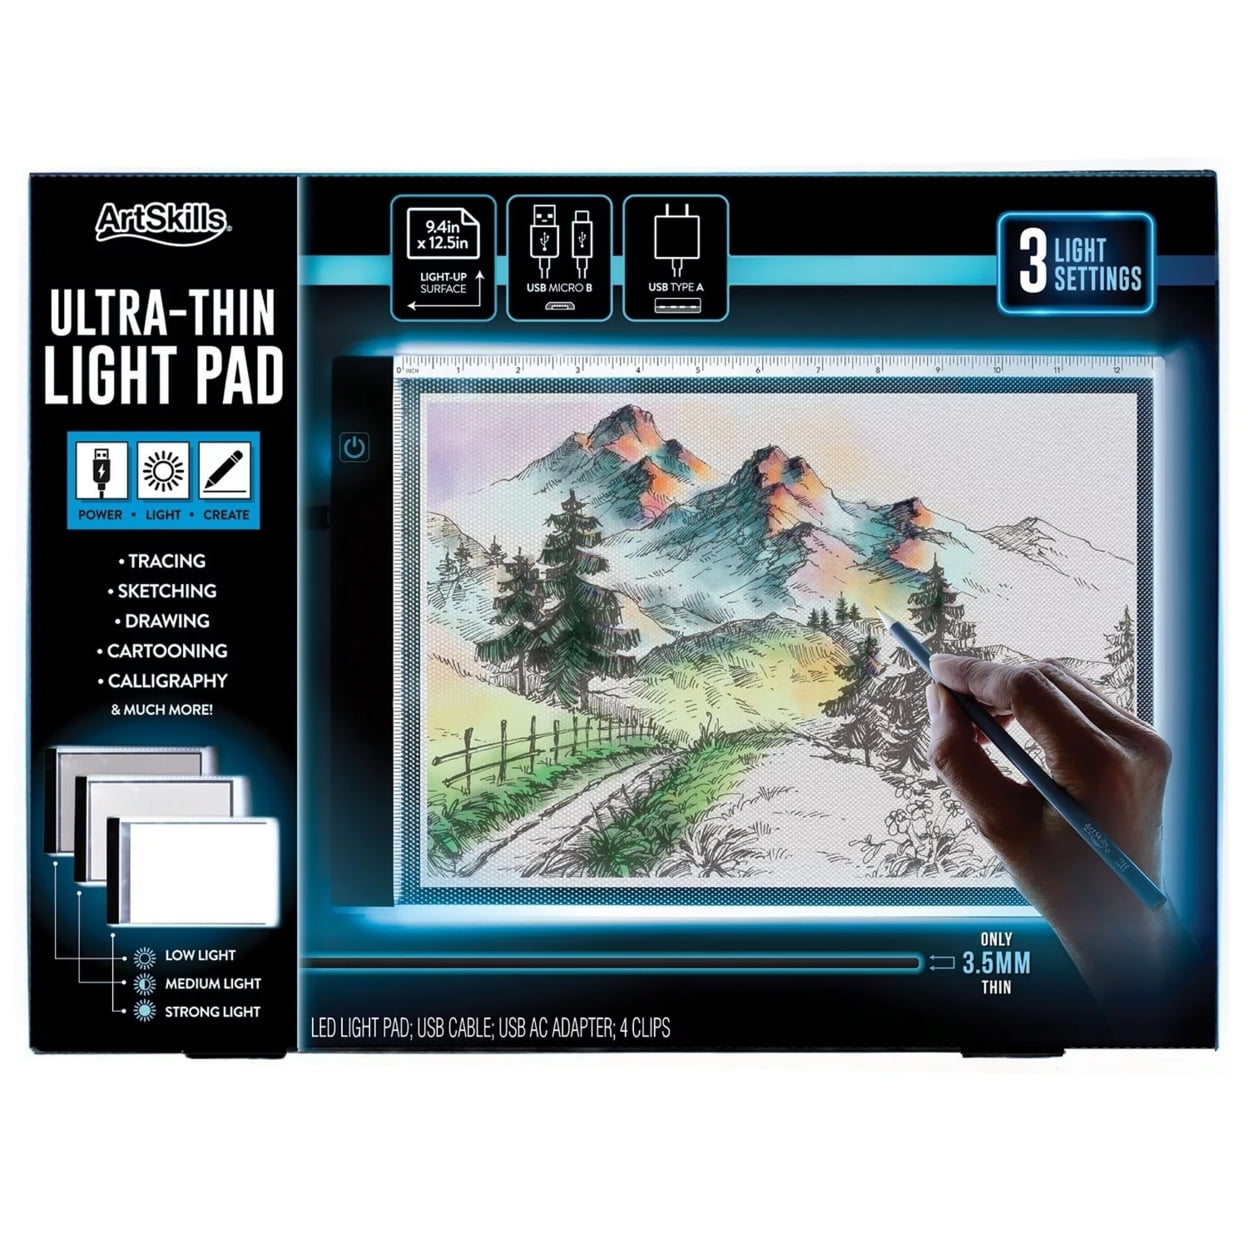 Acurit Art Drawing Tracing Light Tablet For Artists, Drawing, Sketching,  Animation A2 16.5 x 23.4 Inch - White/Black 